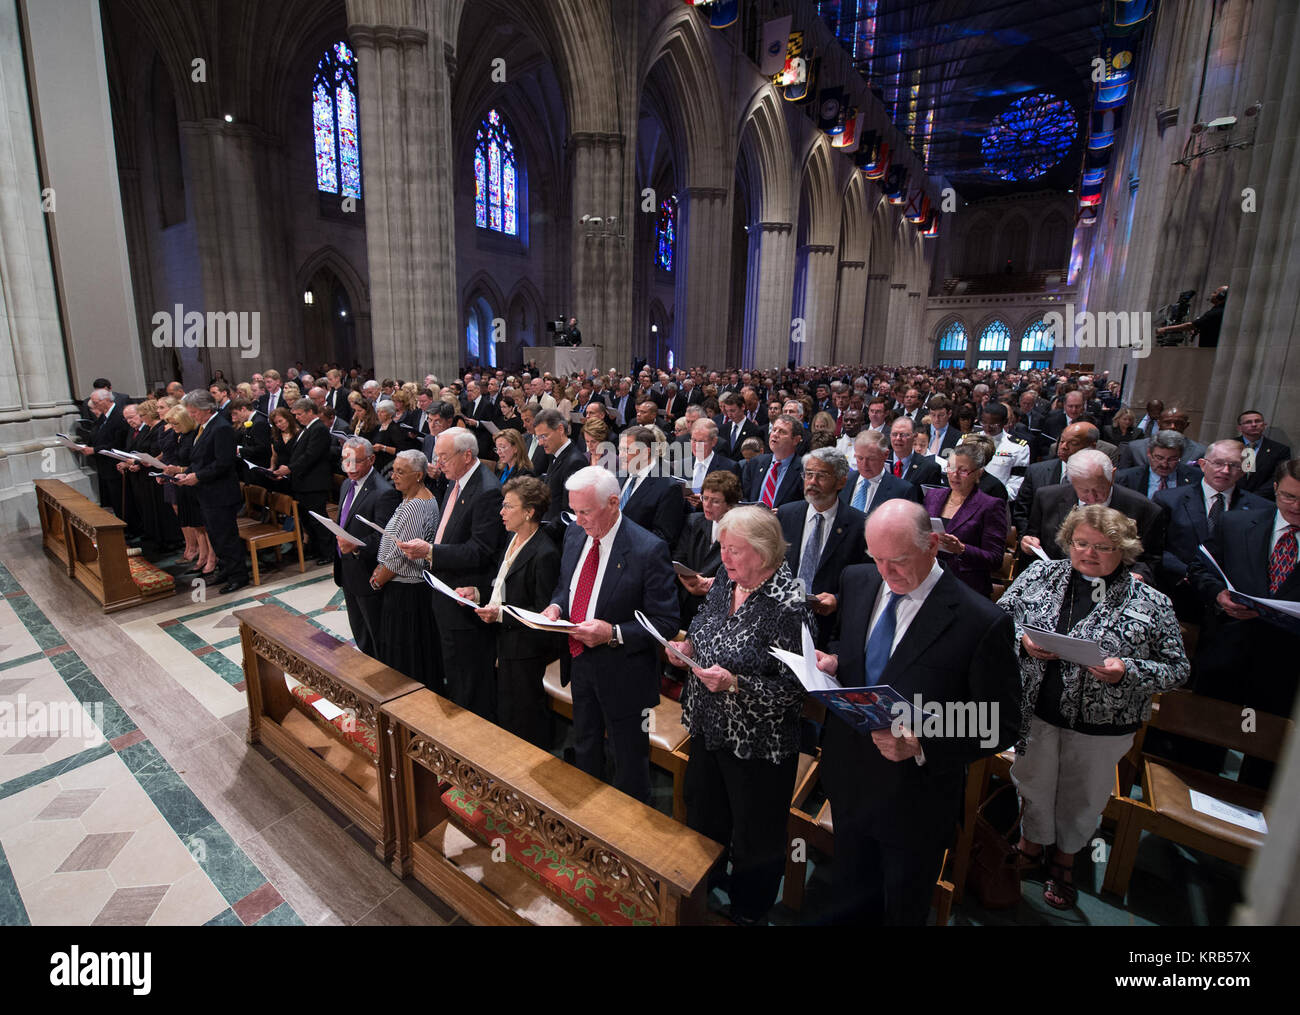 Attendees to the memorial service for Neil Armstrong sing a hymnal, Thursday, Sept. 13, 2012, at the Washington National Cathedral. Armstrong, the first man to walk on the moon during the 1969 Apollo 11 mission, died Saturday, Aug. 25. He was 82. Photo Credit: (NASA/Bill Ingalls) Neil Armstrong public memorial service (201209130012HQ) Stock Photo